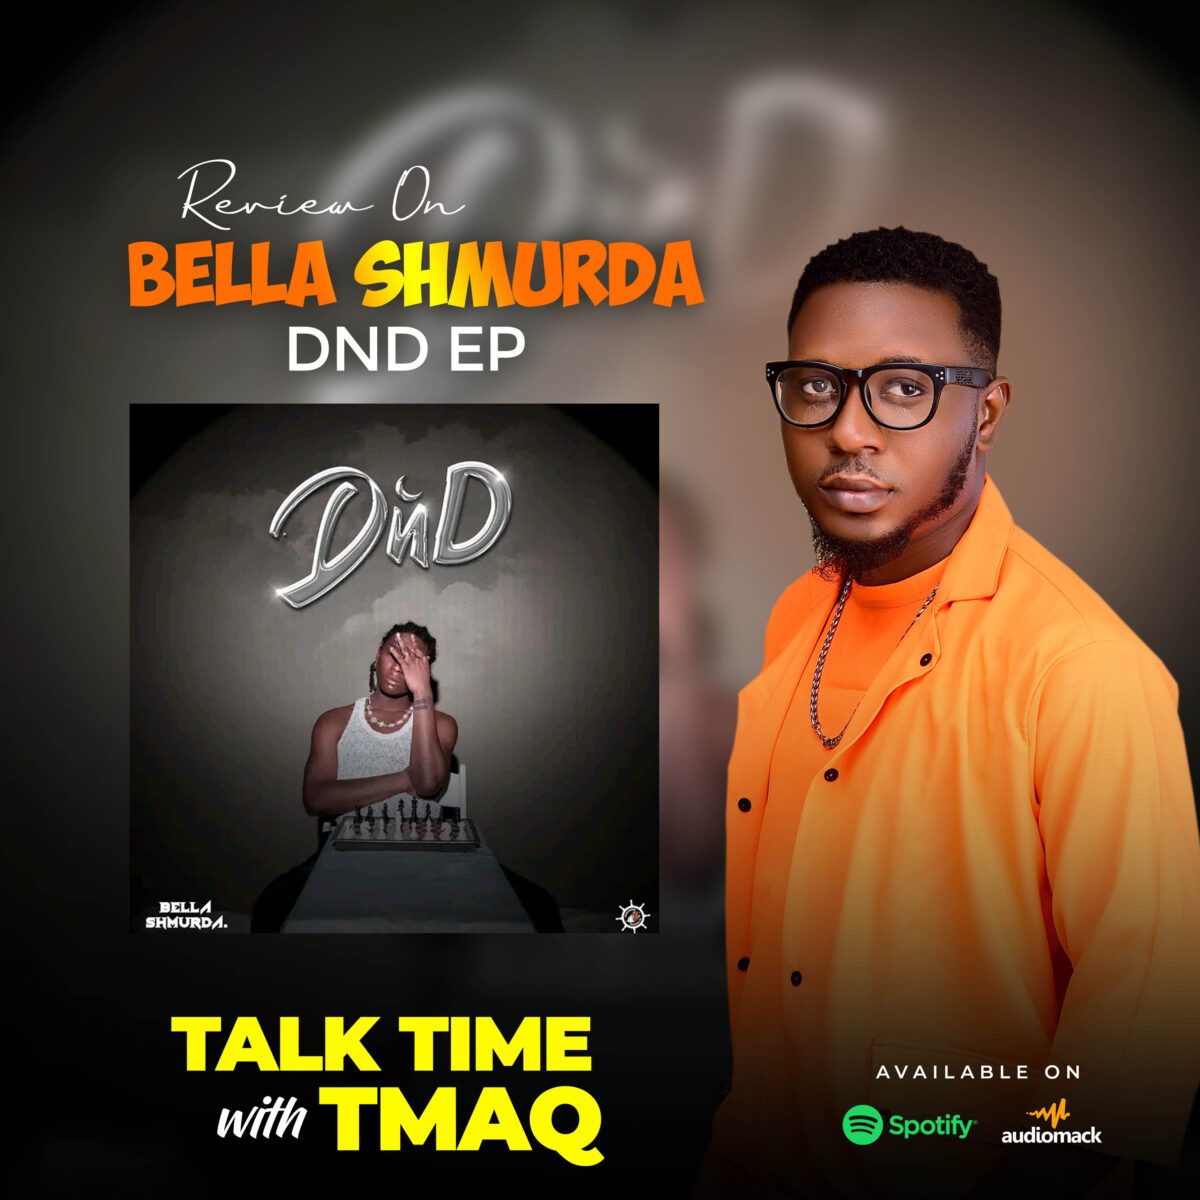 Talk Time With Tmaq REVIEW OF BELLE SHMURDA DnD